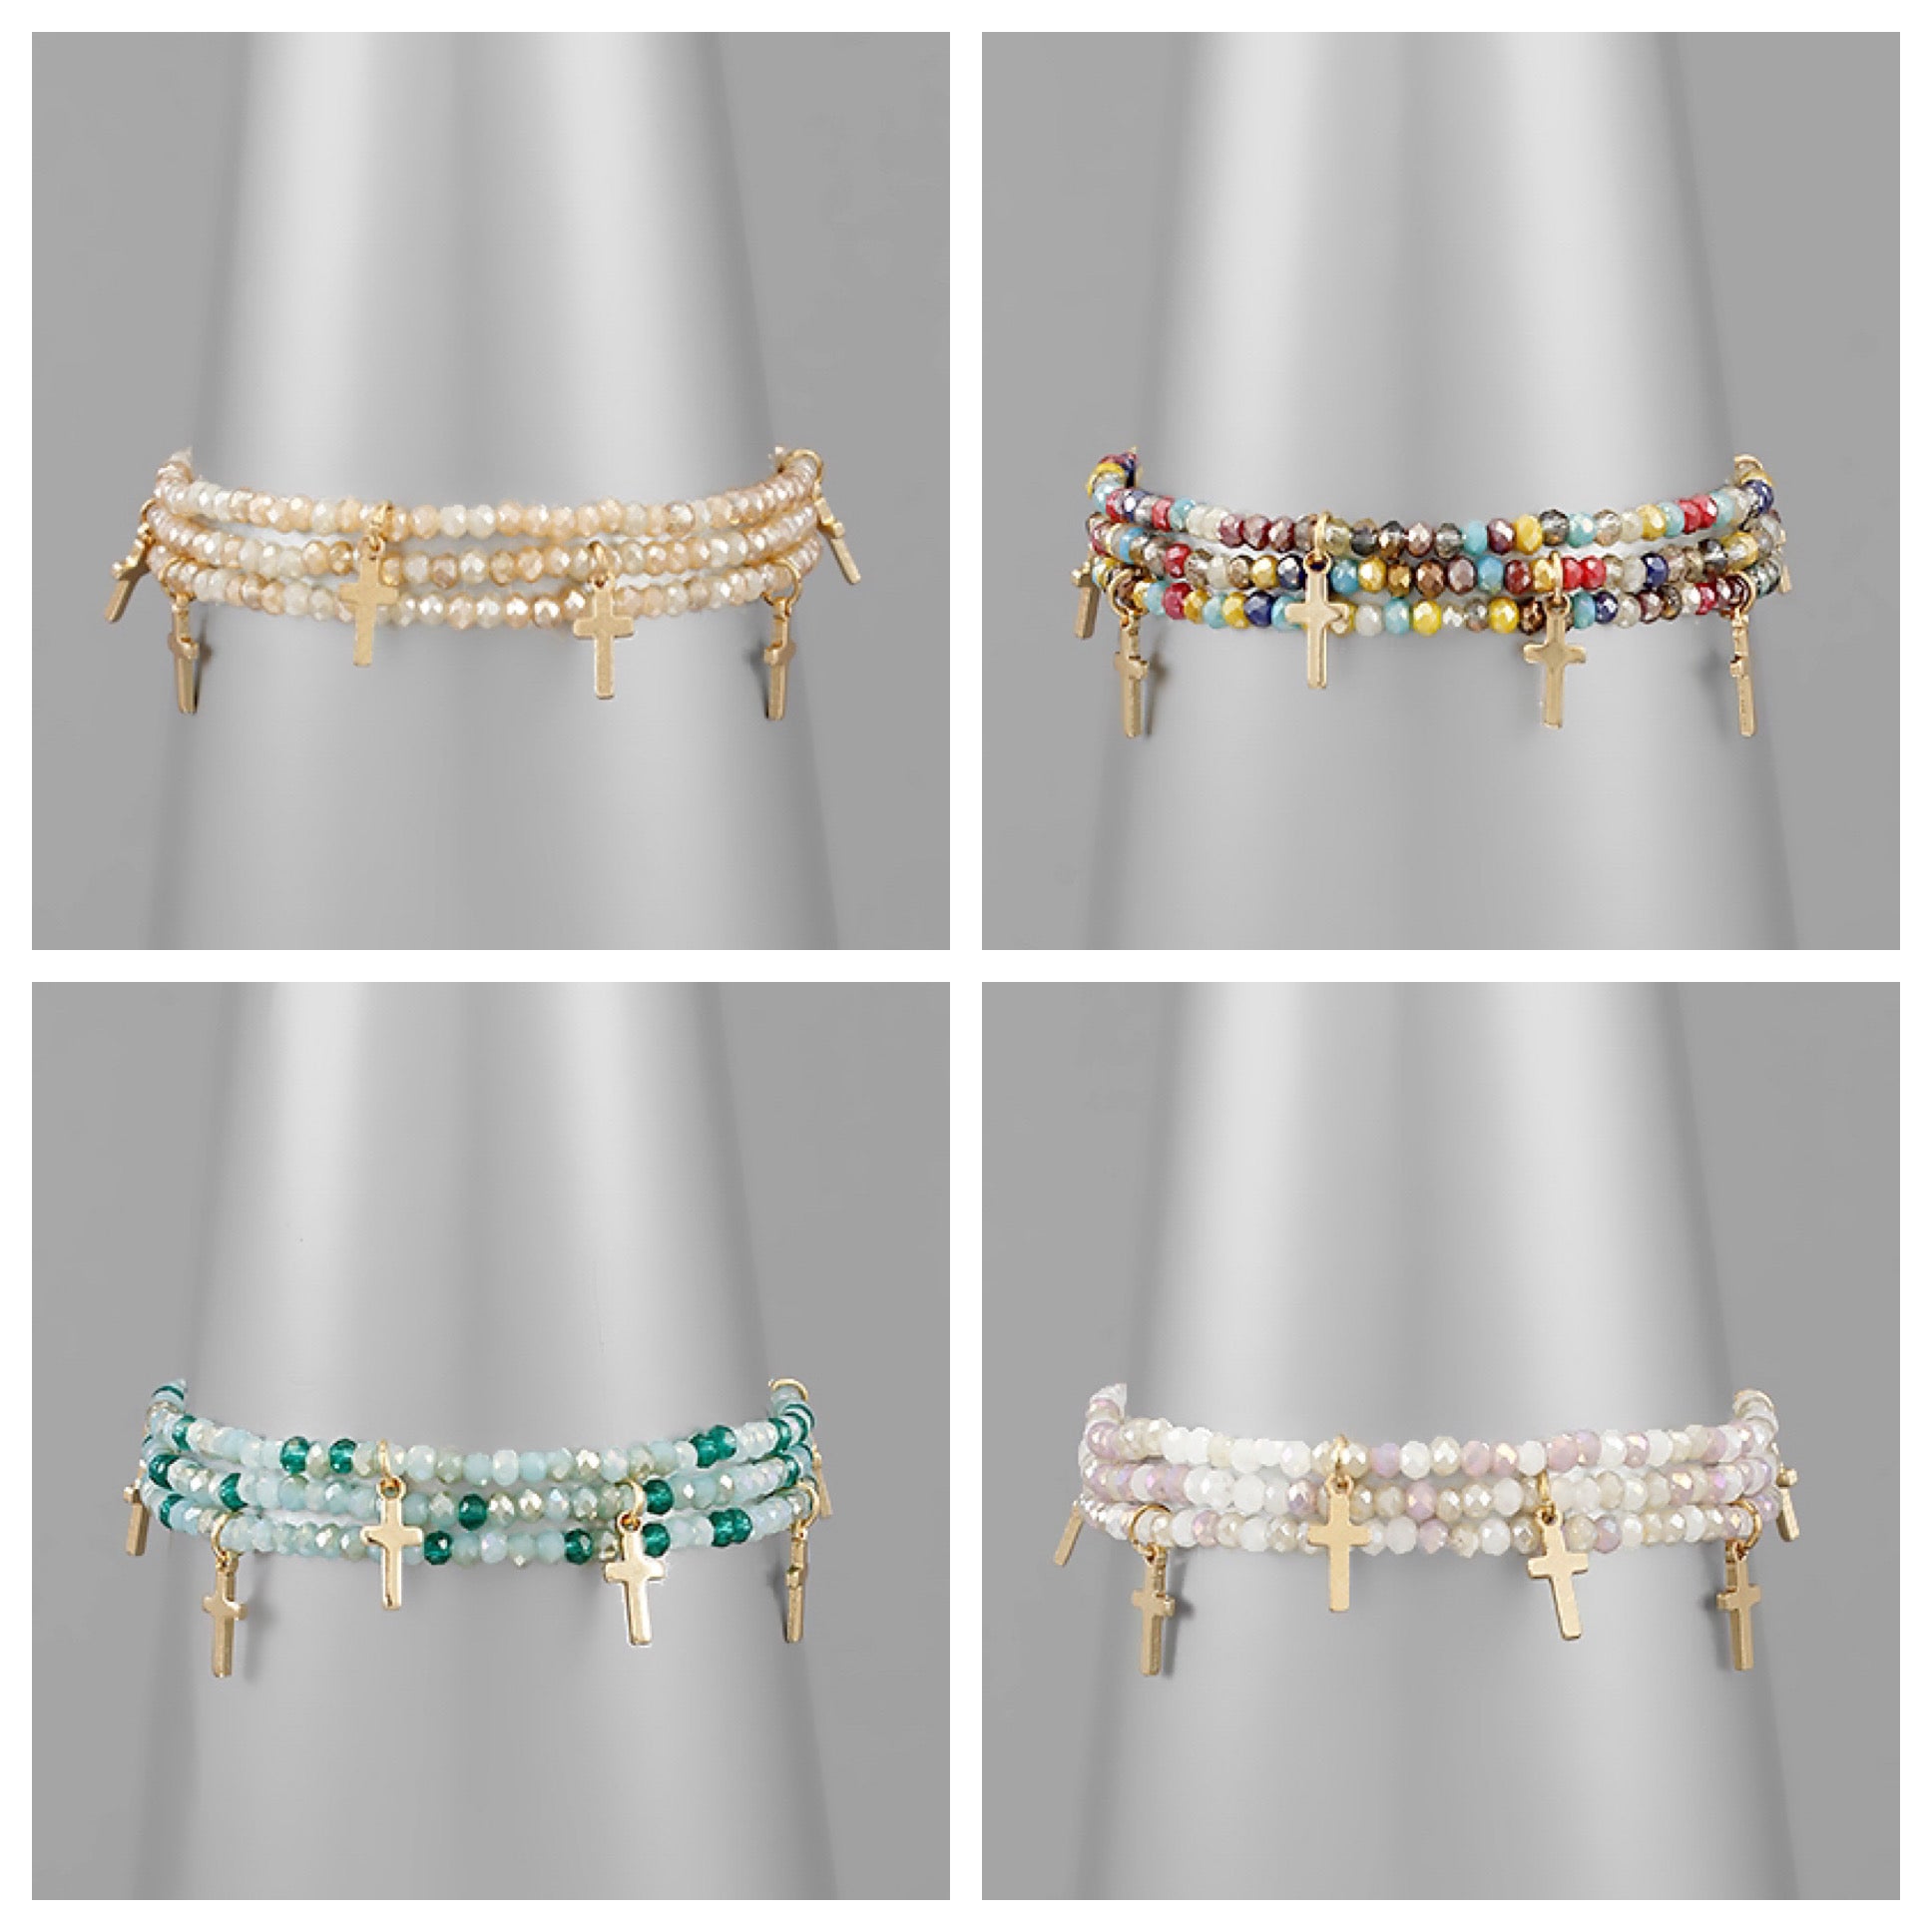 Assorted cross bracelets with cross charms and varying colored beads.